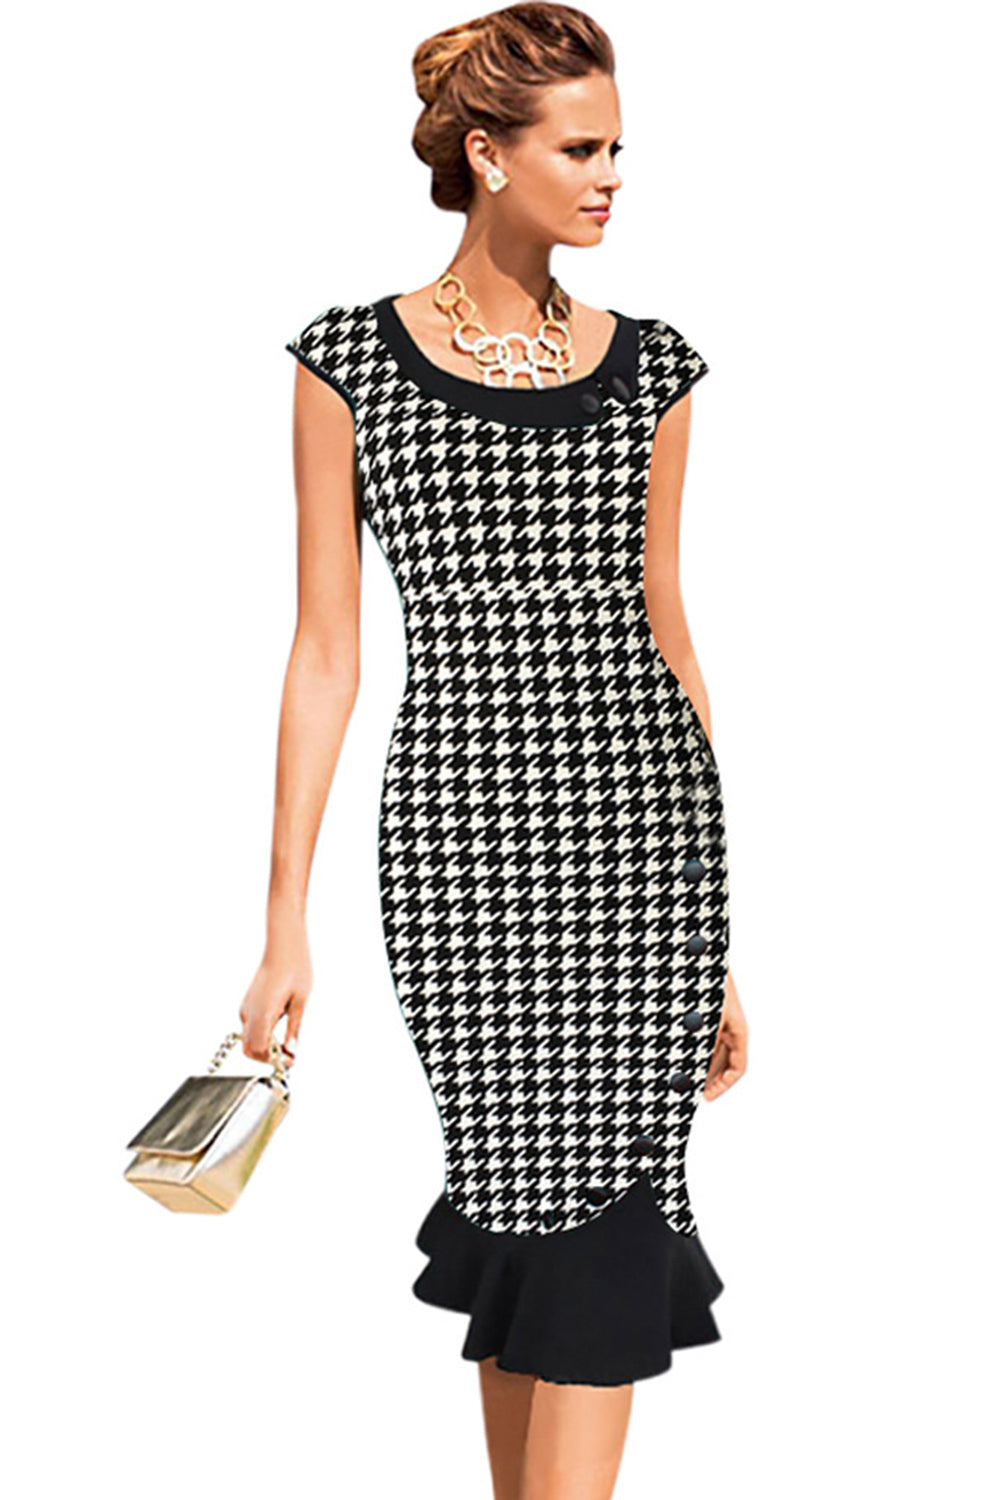 Ketty More Women Cup  Sleeves Plaid  Pattern Pencil Dress-KMWD369